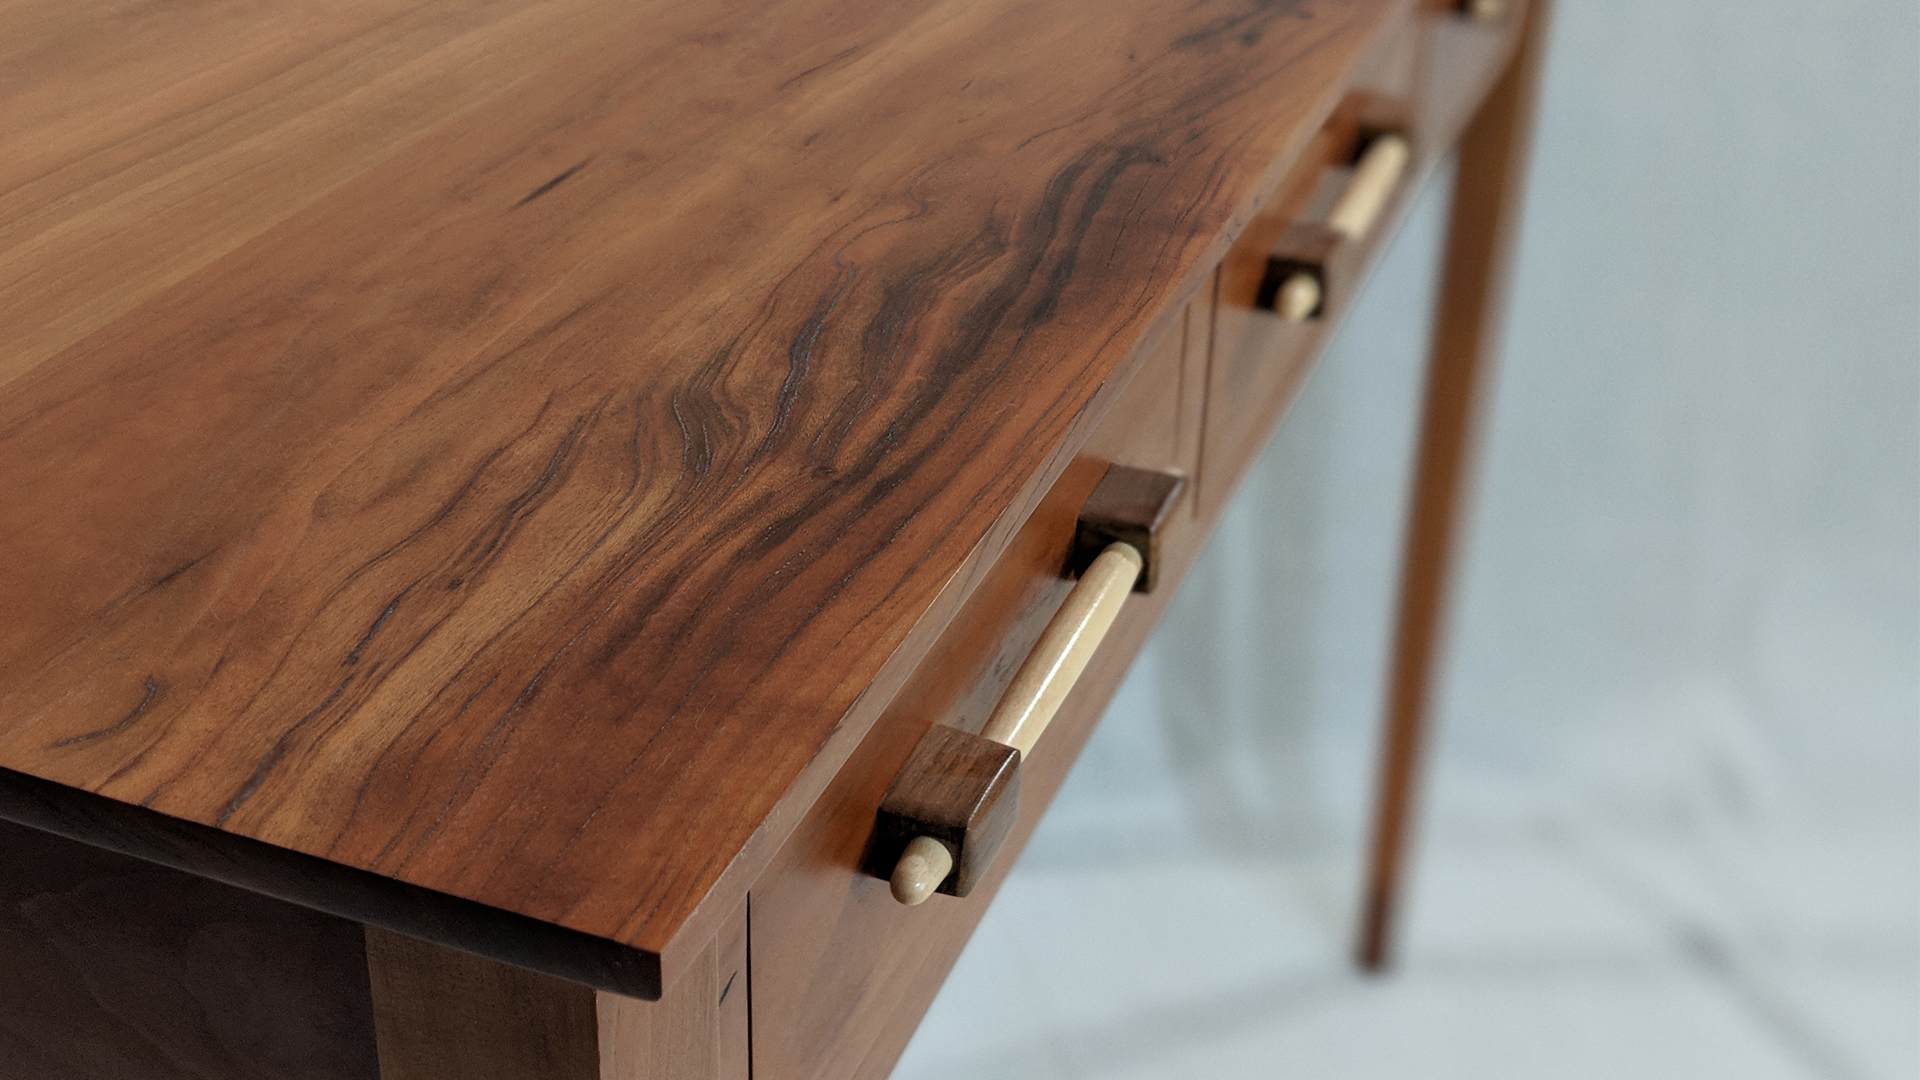 Cherry Entry Table